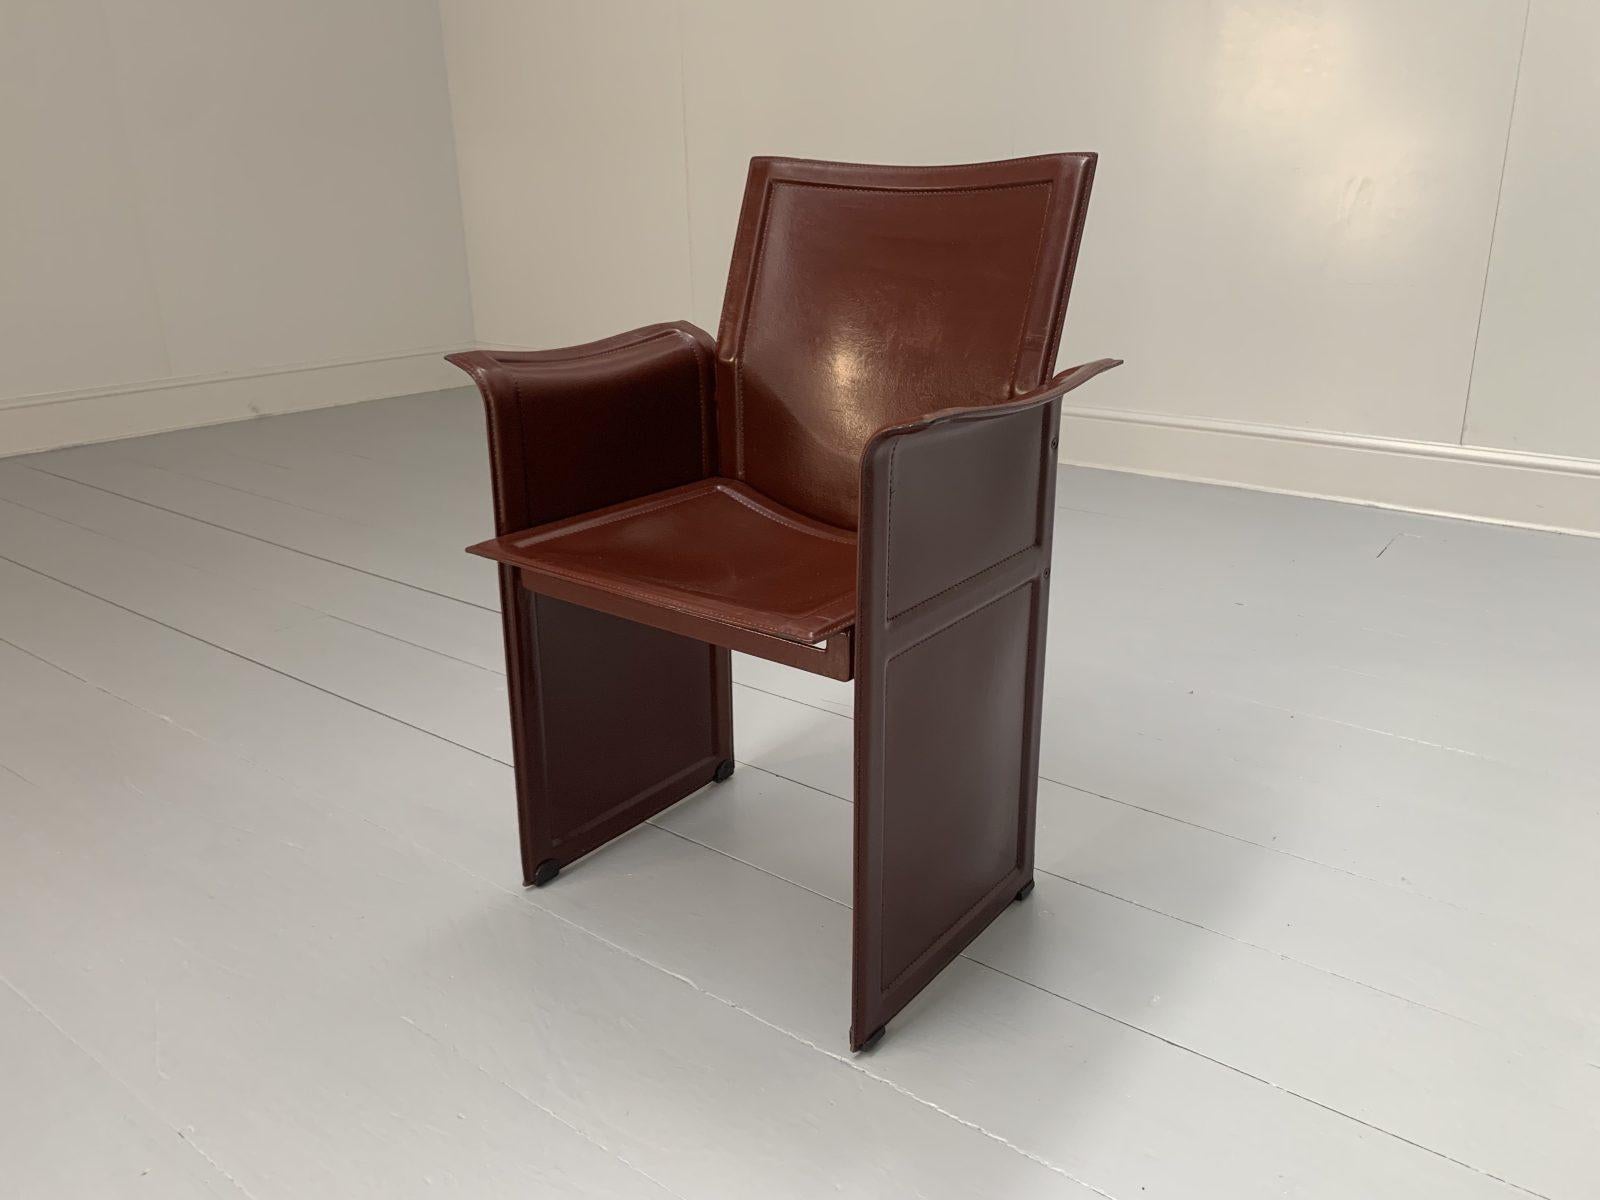 8 Matteo Grassi “Korium” Dining Chairs, in Brown Coach Leather For Sale 7